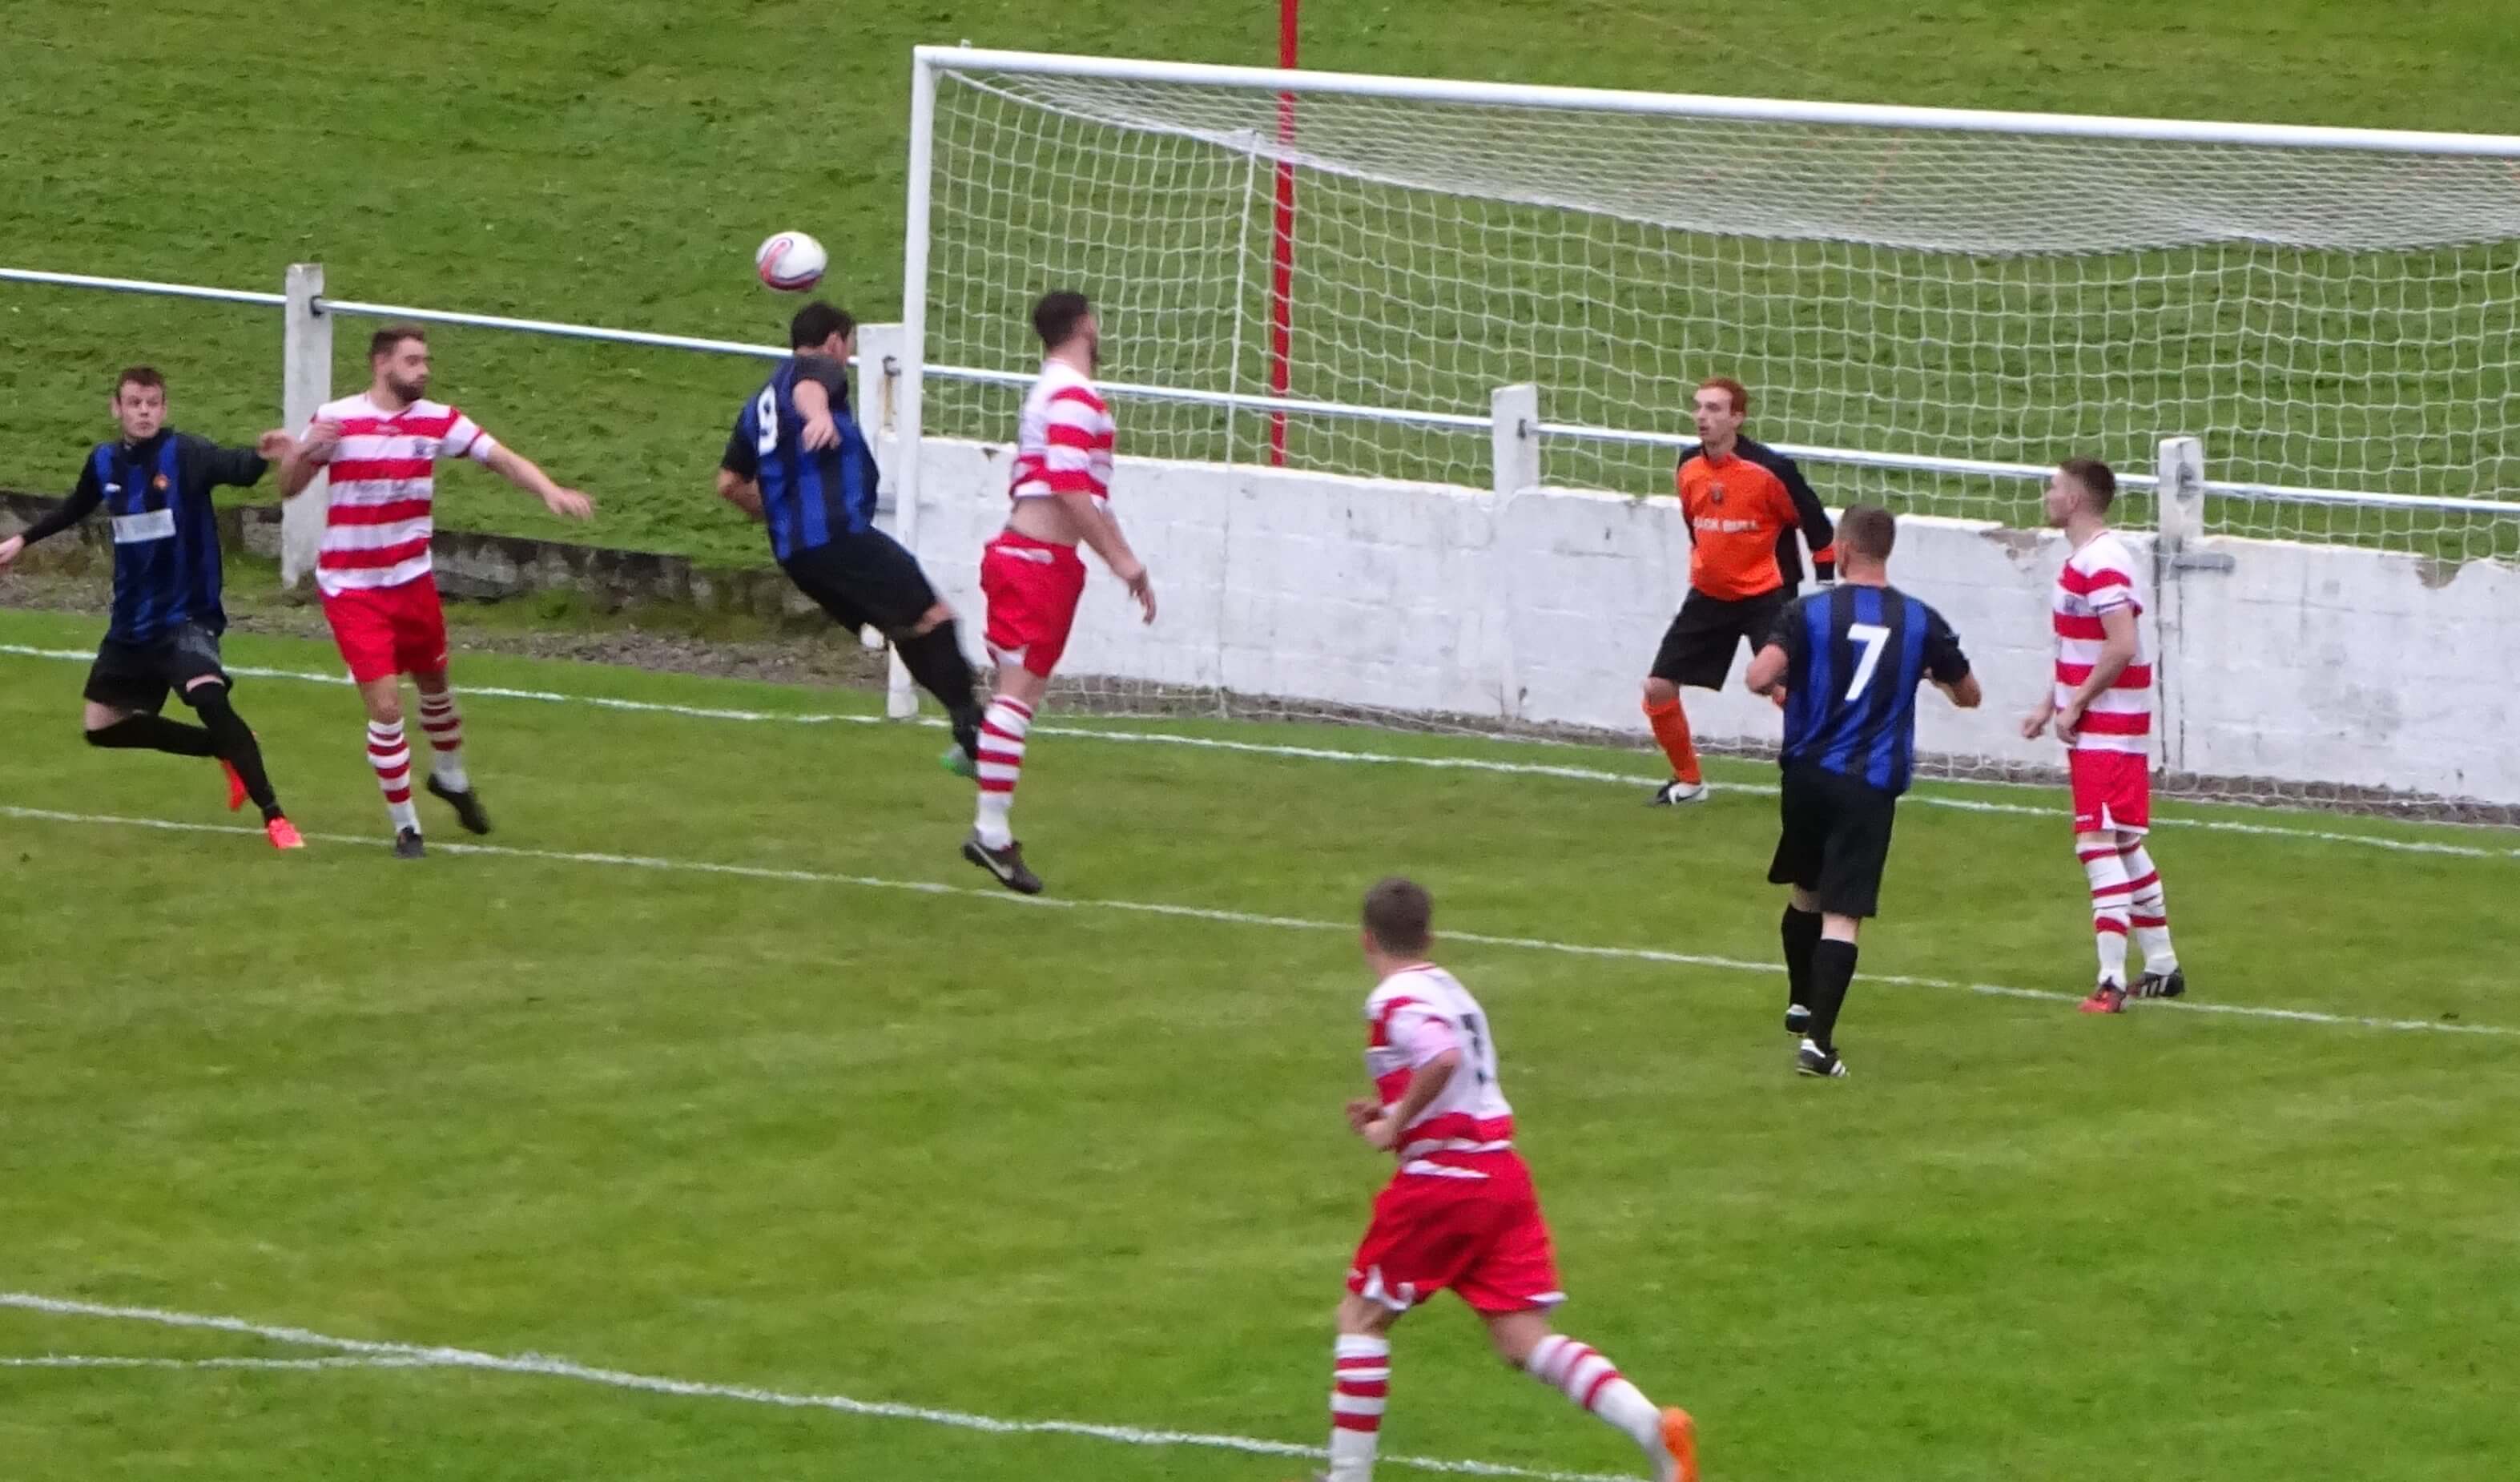 McStay header goes past the post